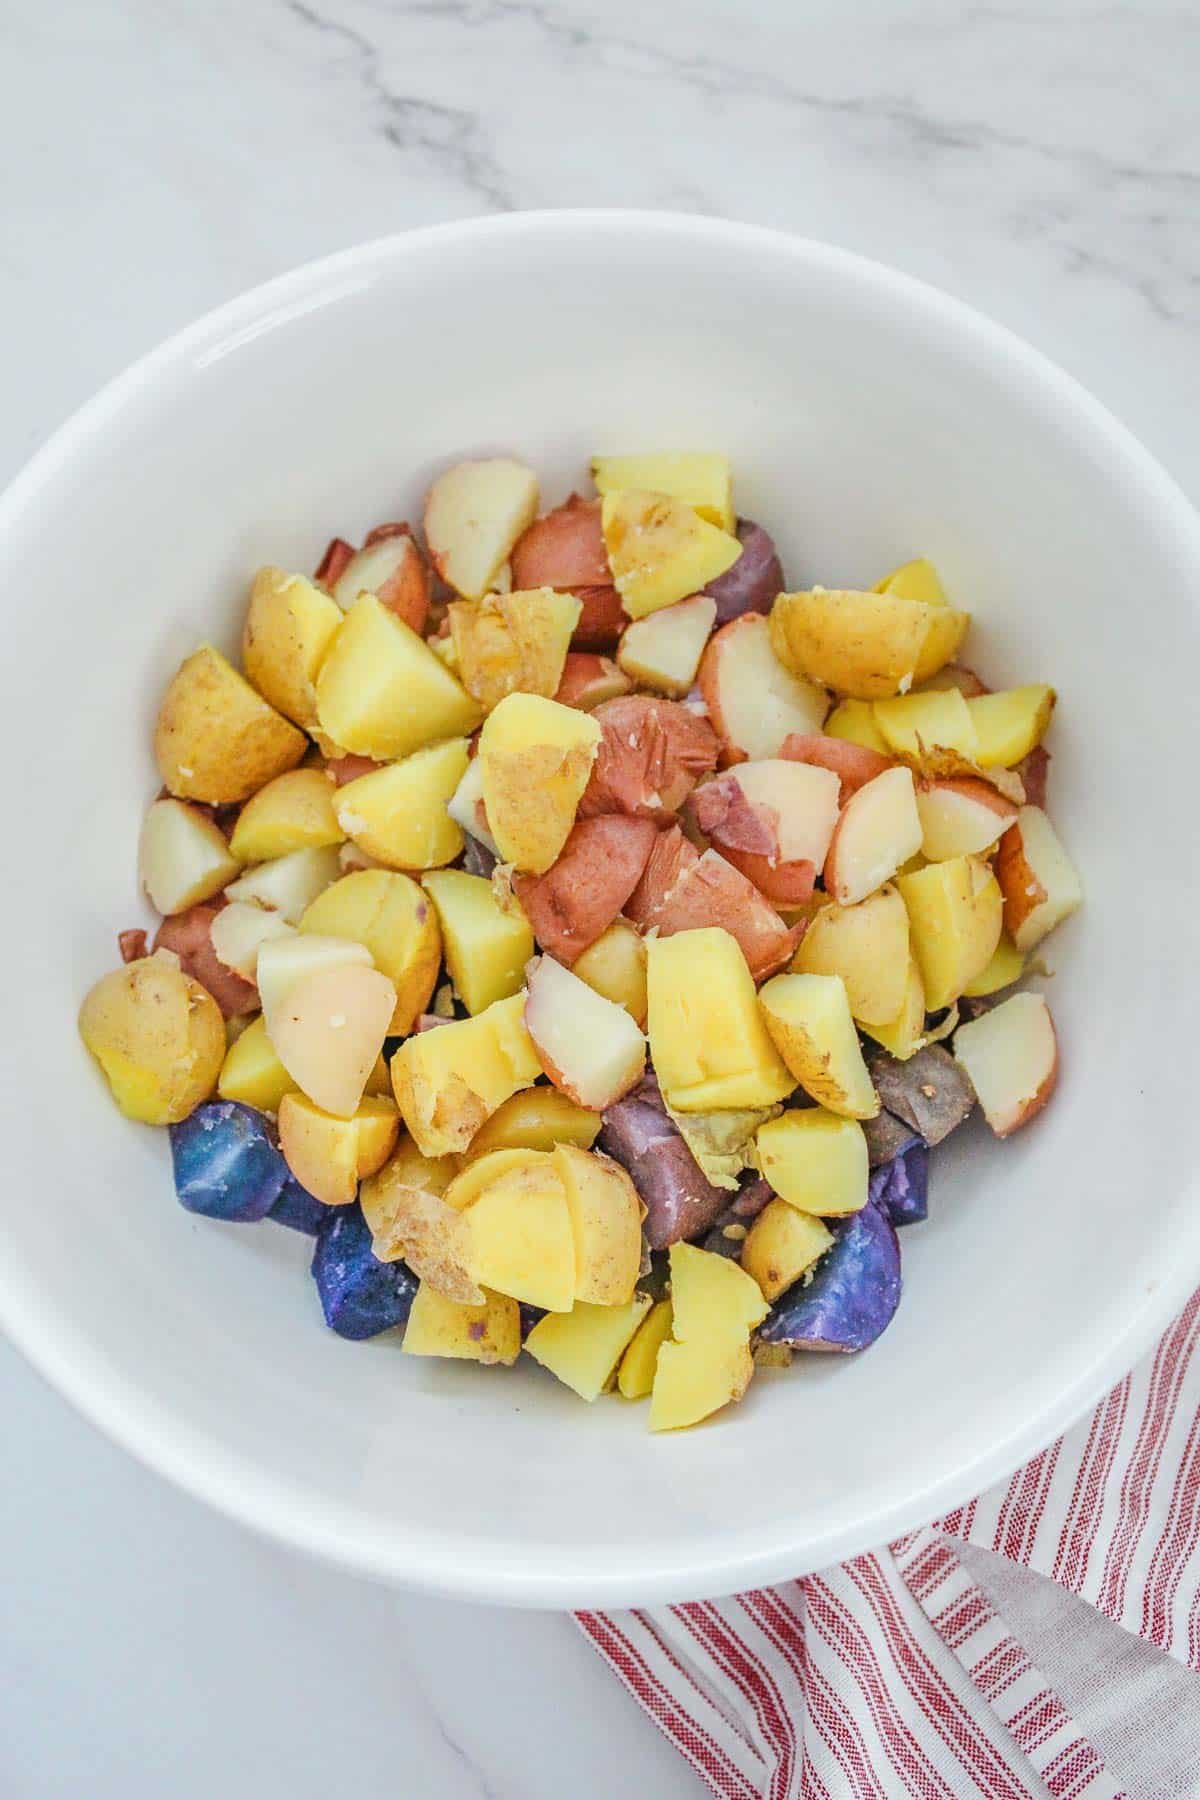 diced potatoes in a white bowl with a red and white striped napkin.